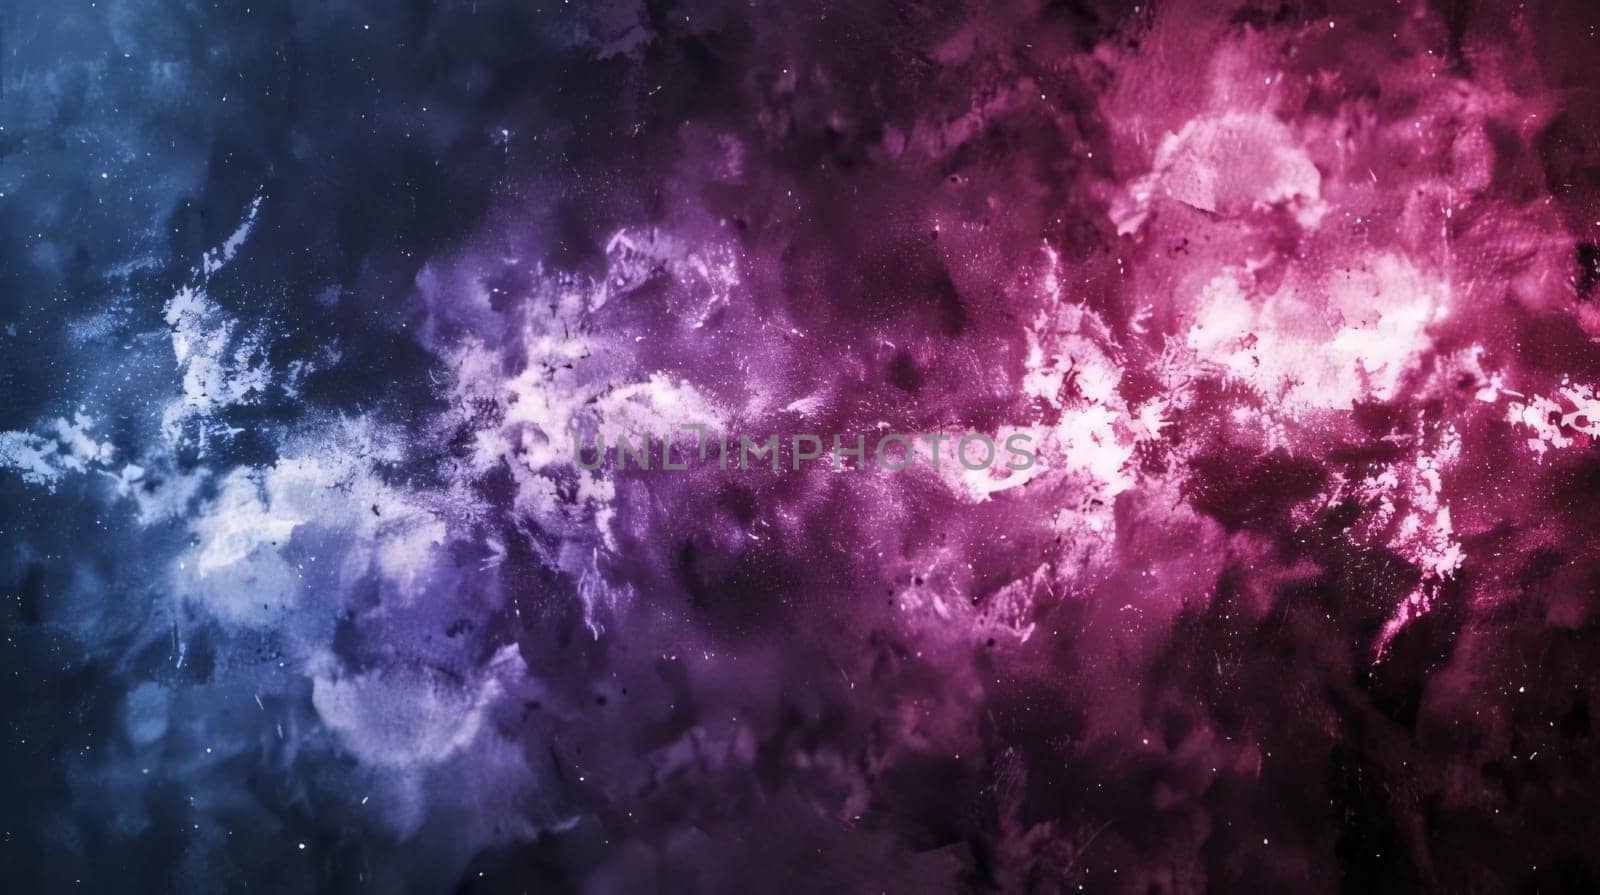 Abstract background design: Abstract space background with stars and nebula. Colorful galaxy.